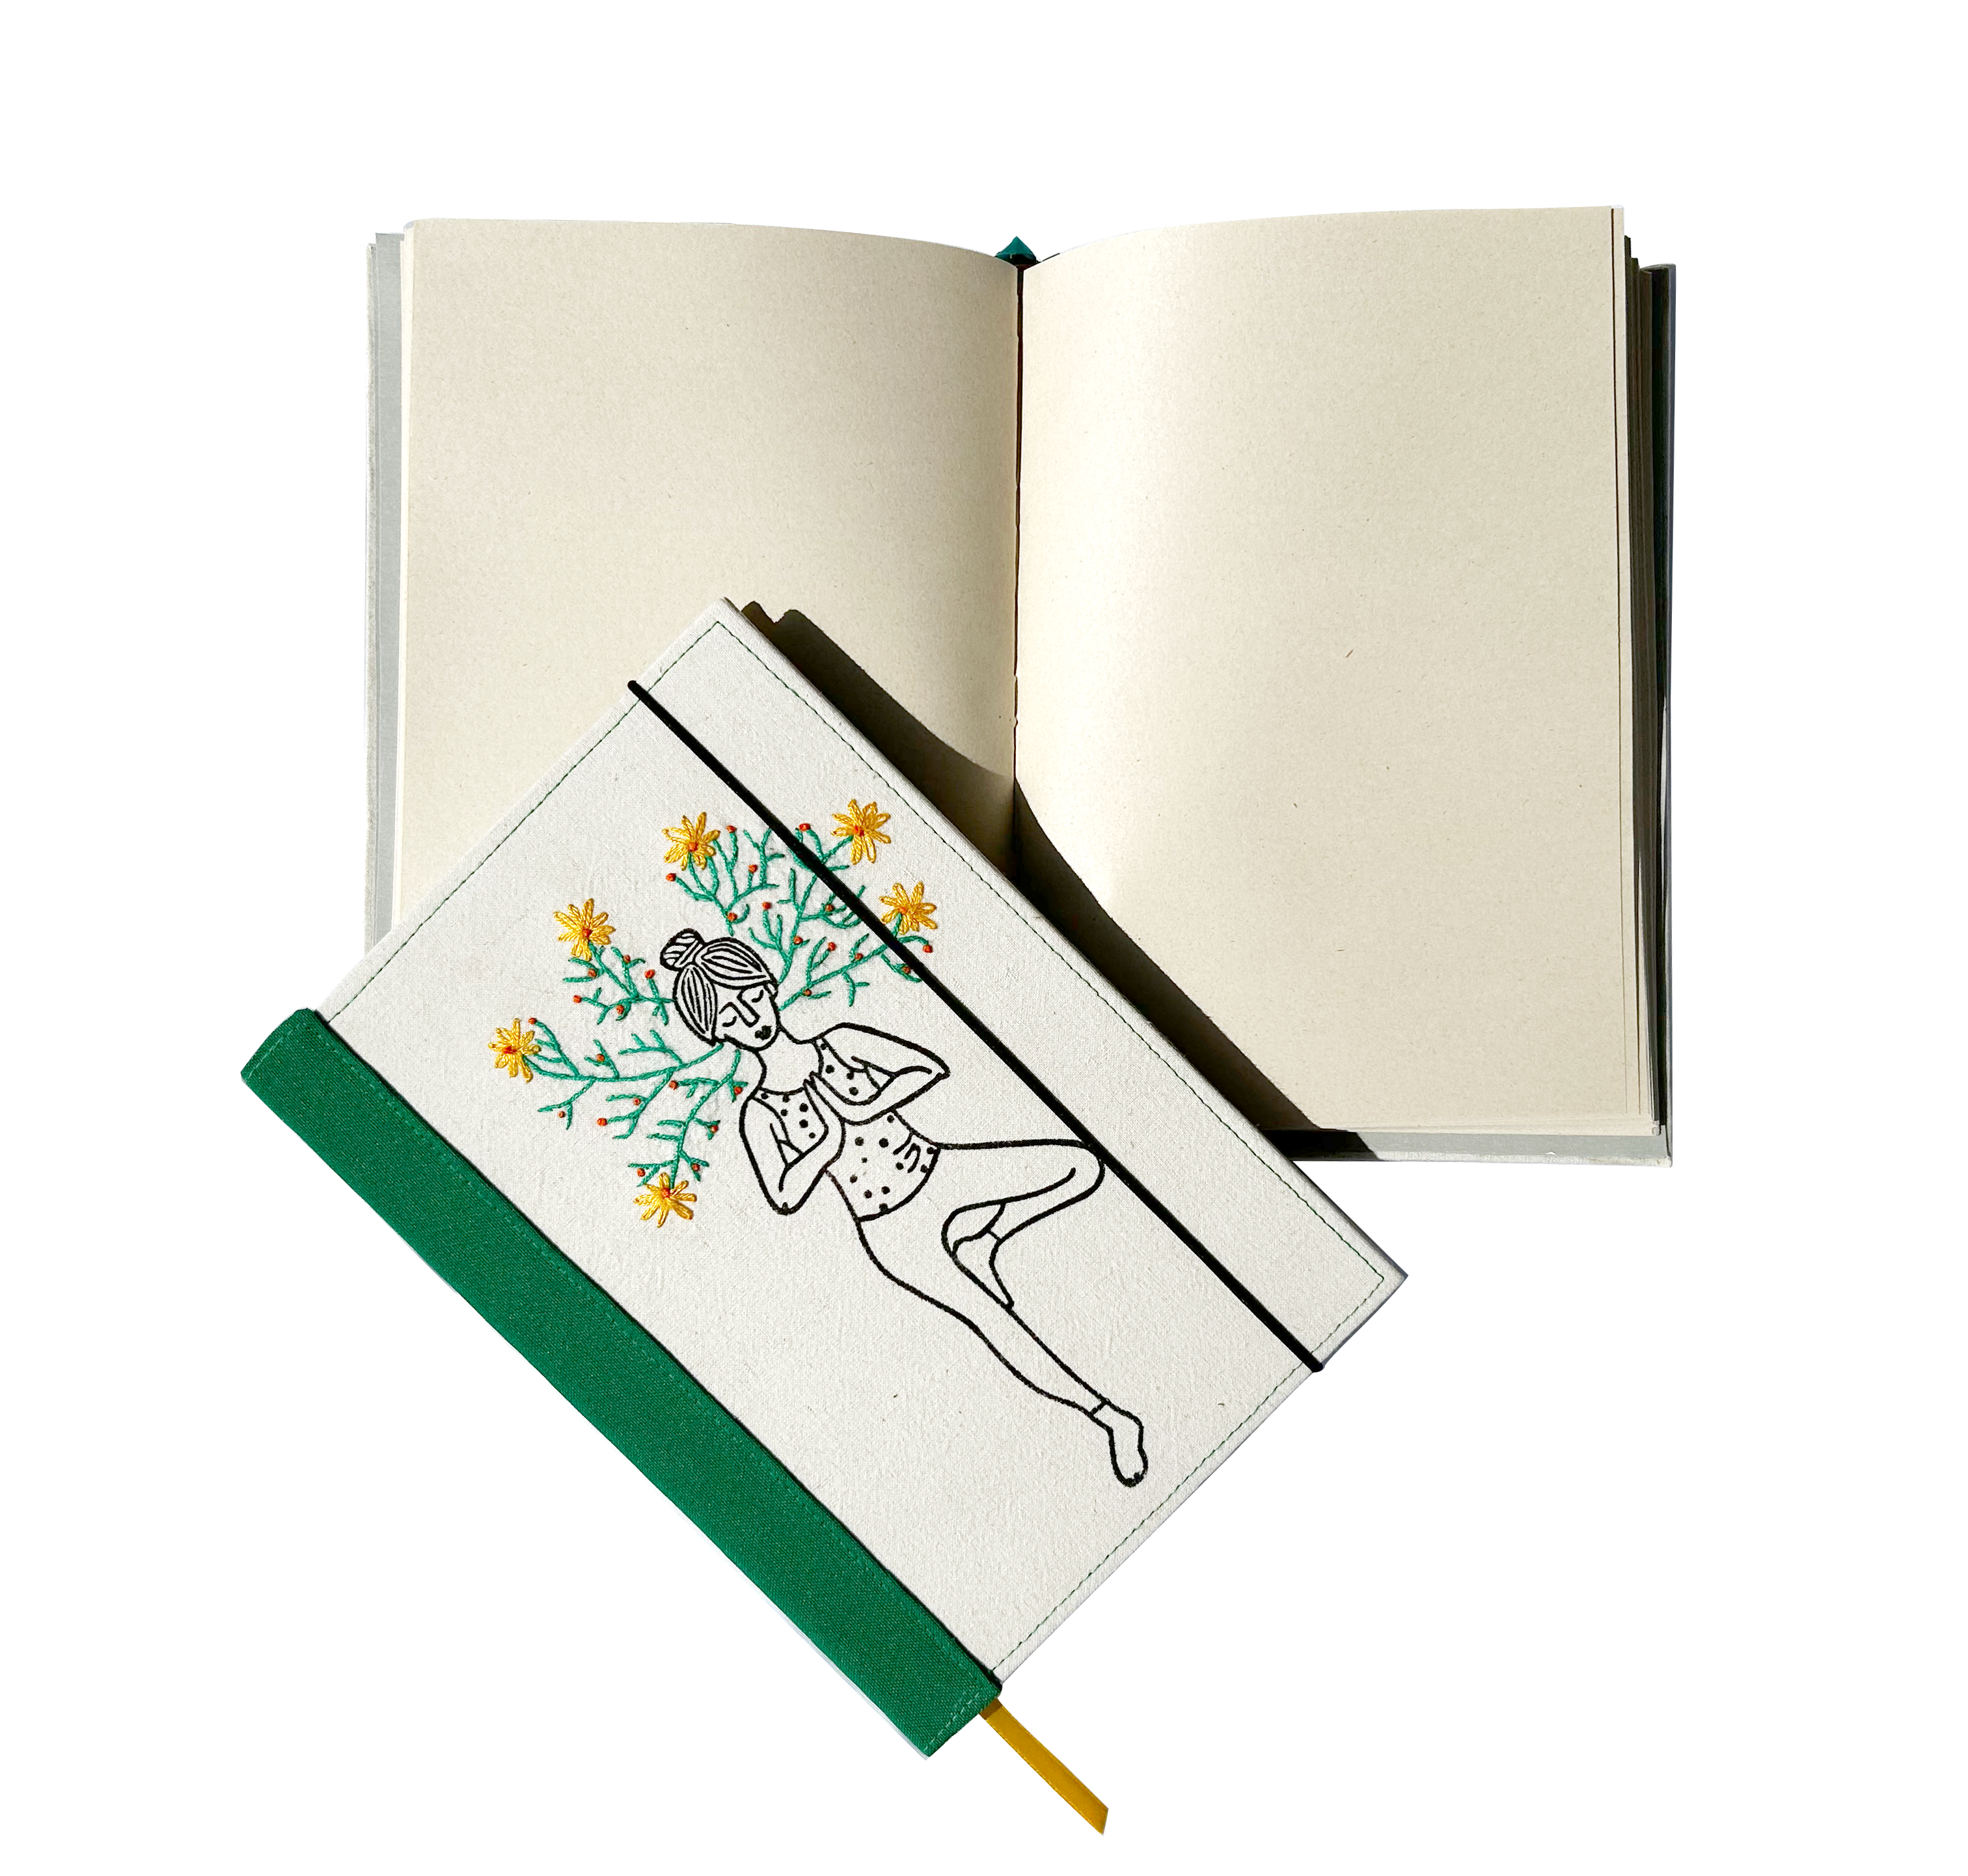 Personalised Yoga Journal By Designed